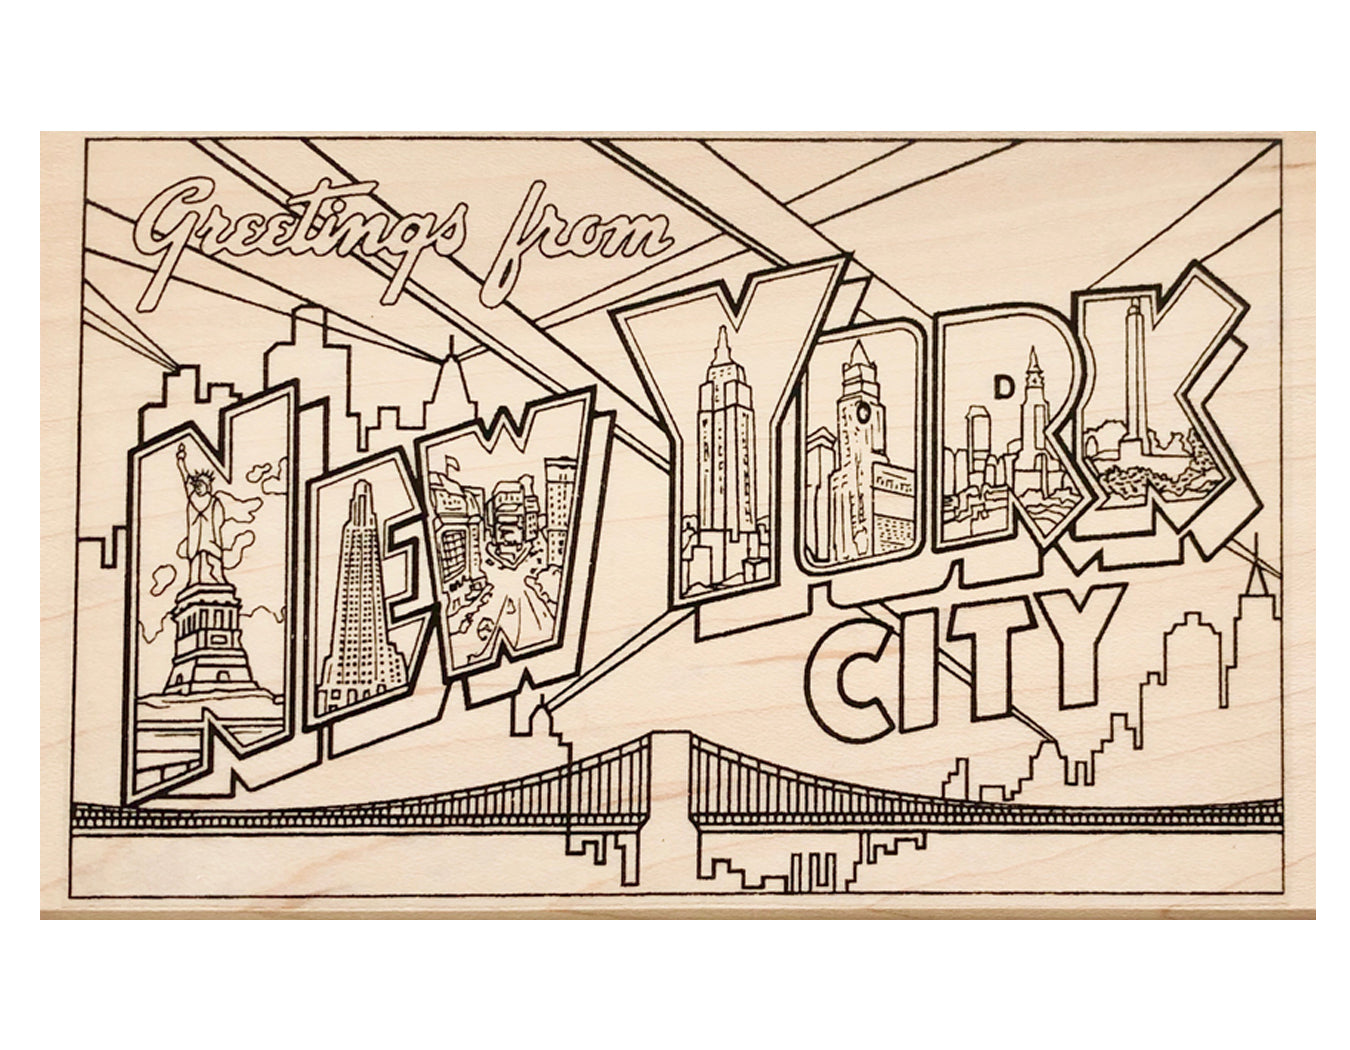 Graphic rubber stamp depicting classic New York City Postcard scene.